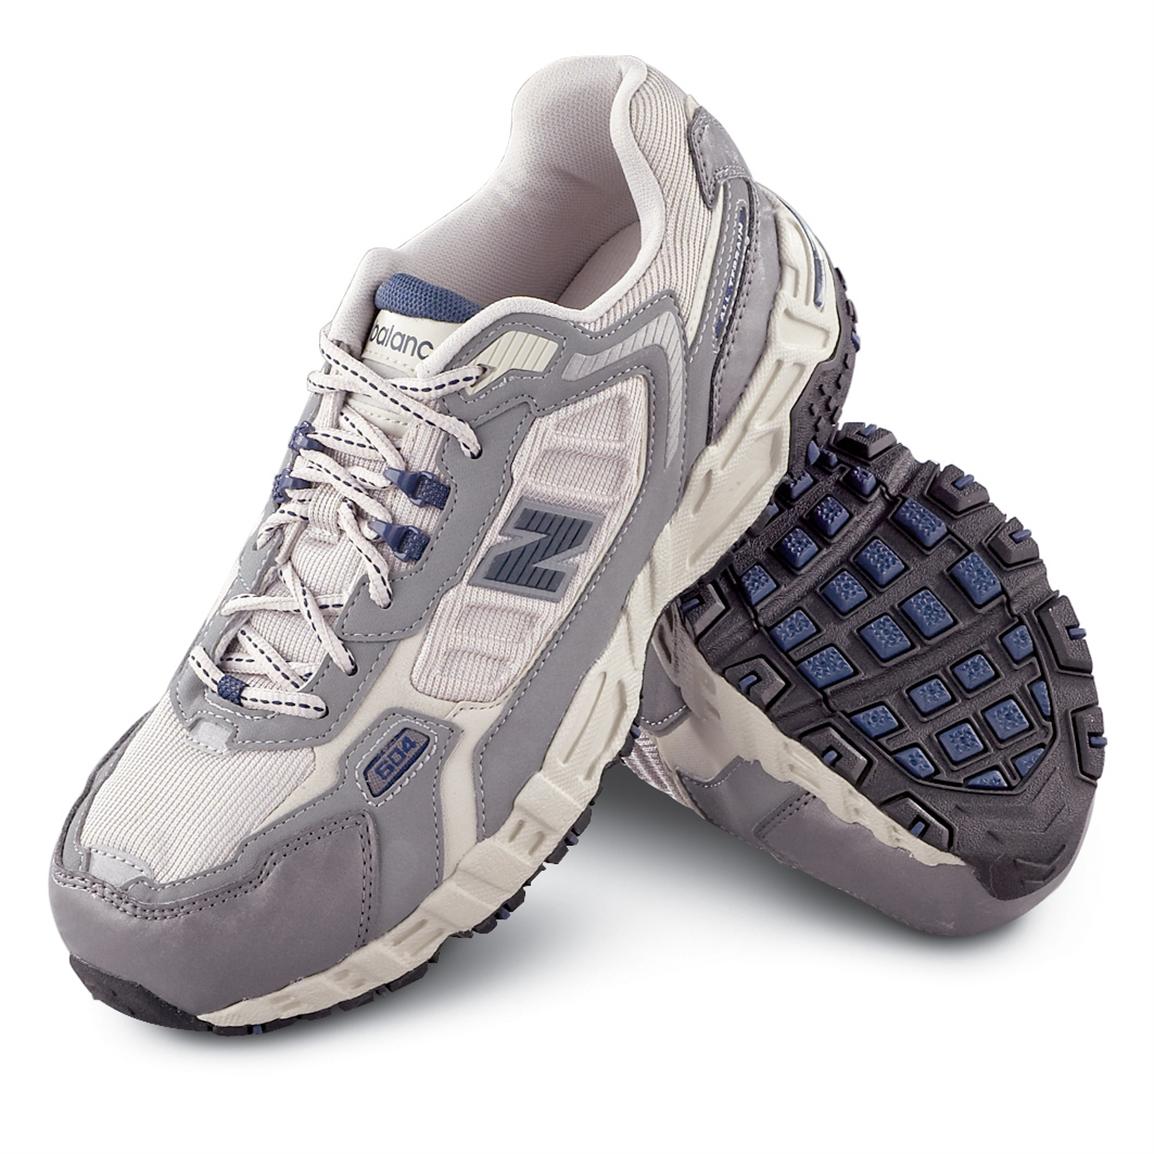 Men's New Balance® 604 Trail Shoes, Khaki / Navy - 99995, Running Shoes \u0026  Sneakers at Sportsman's Guide